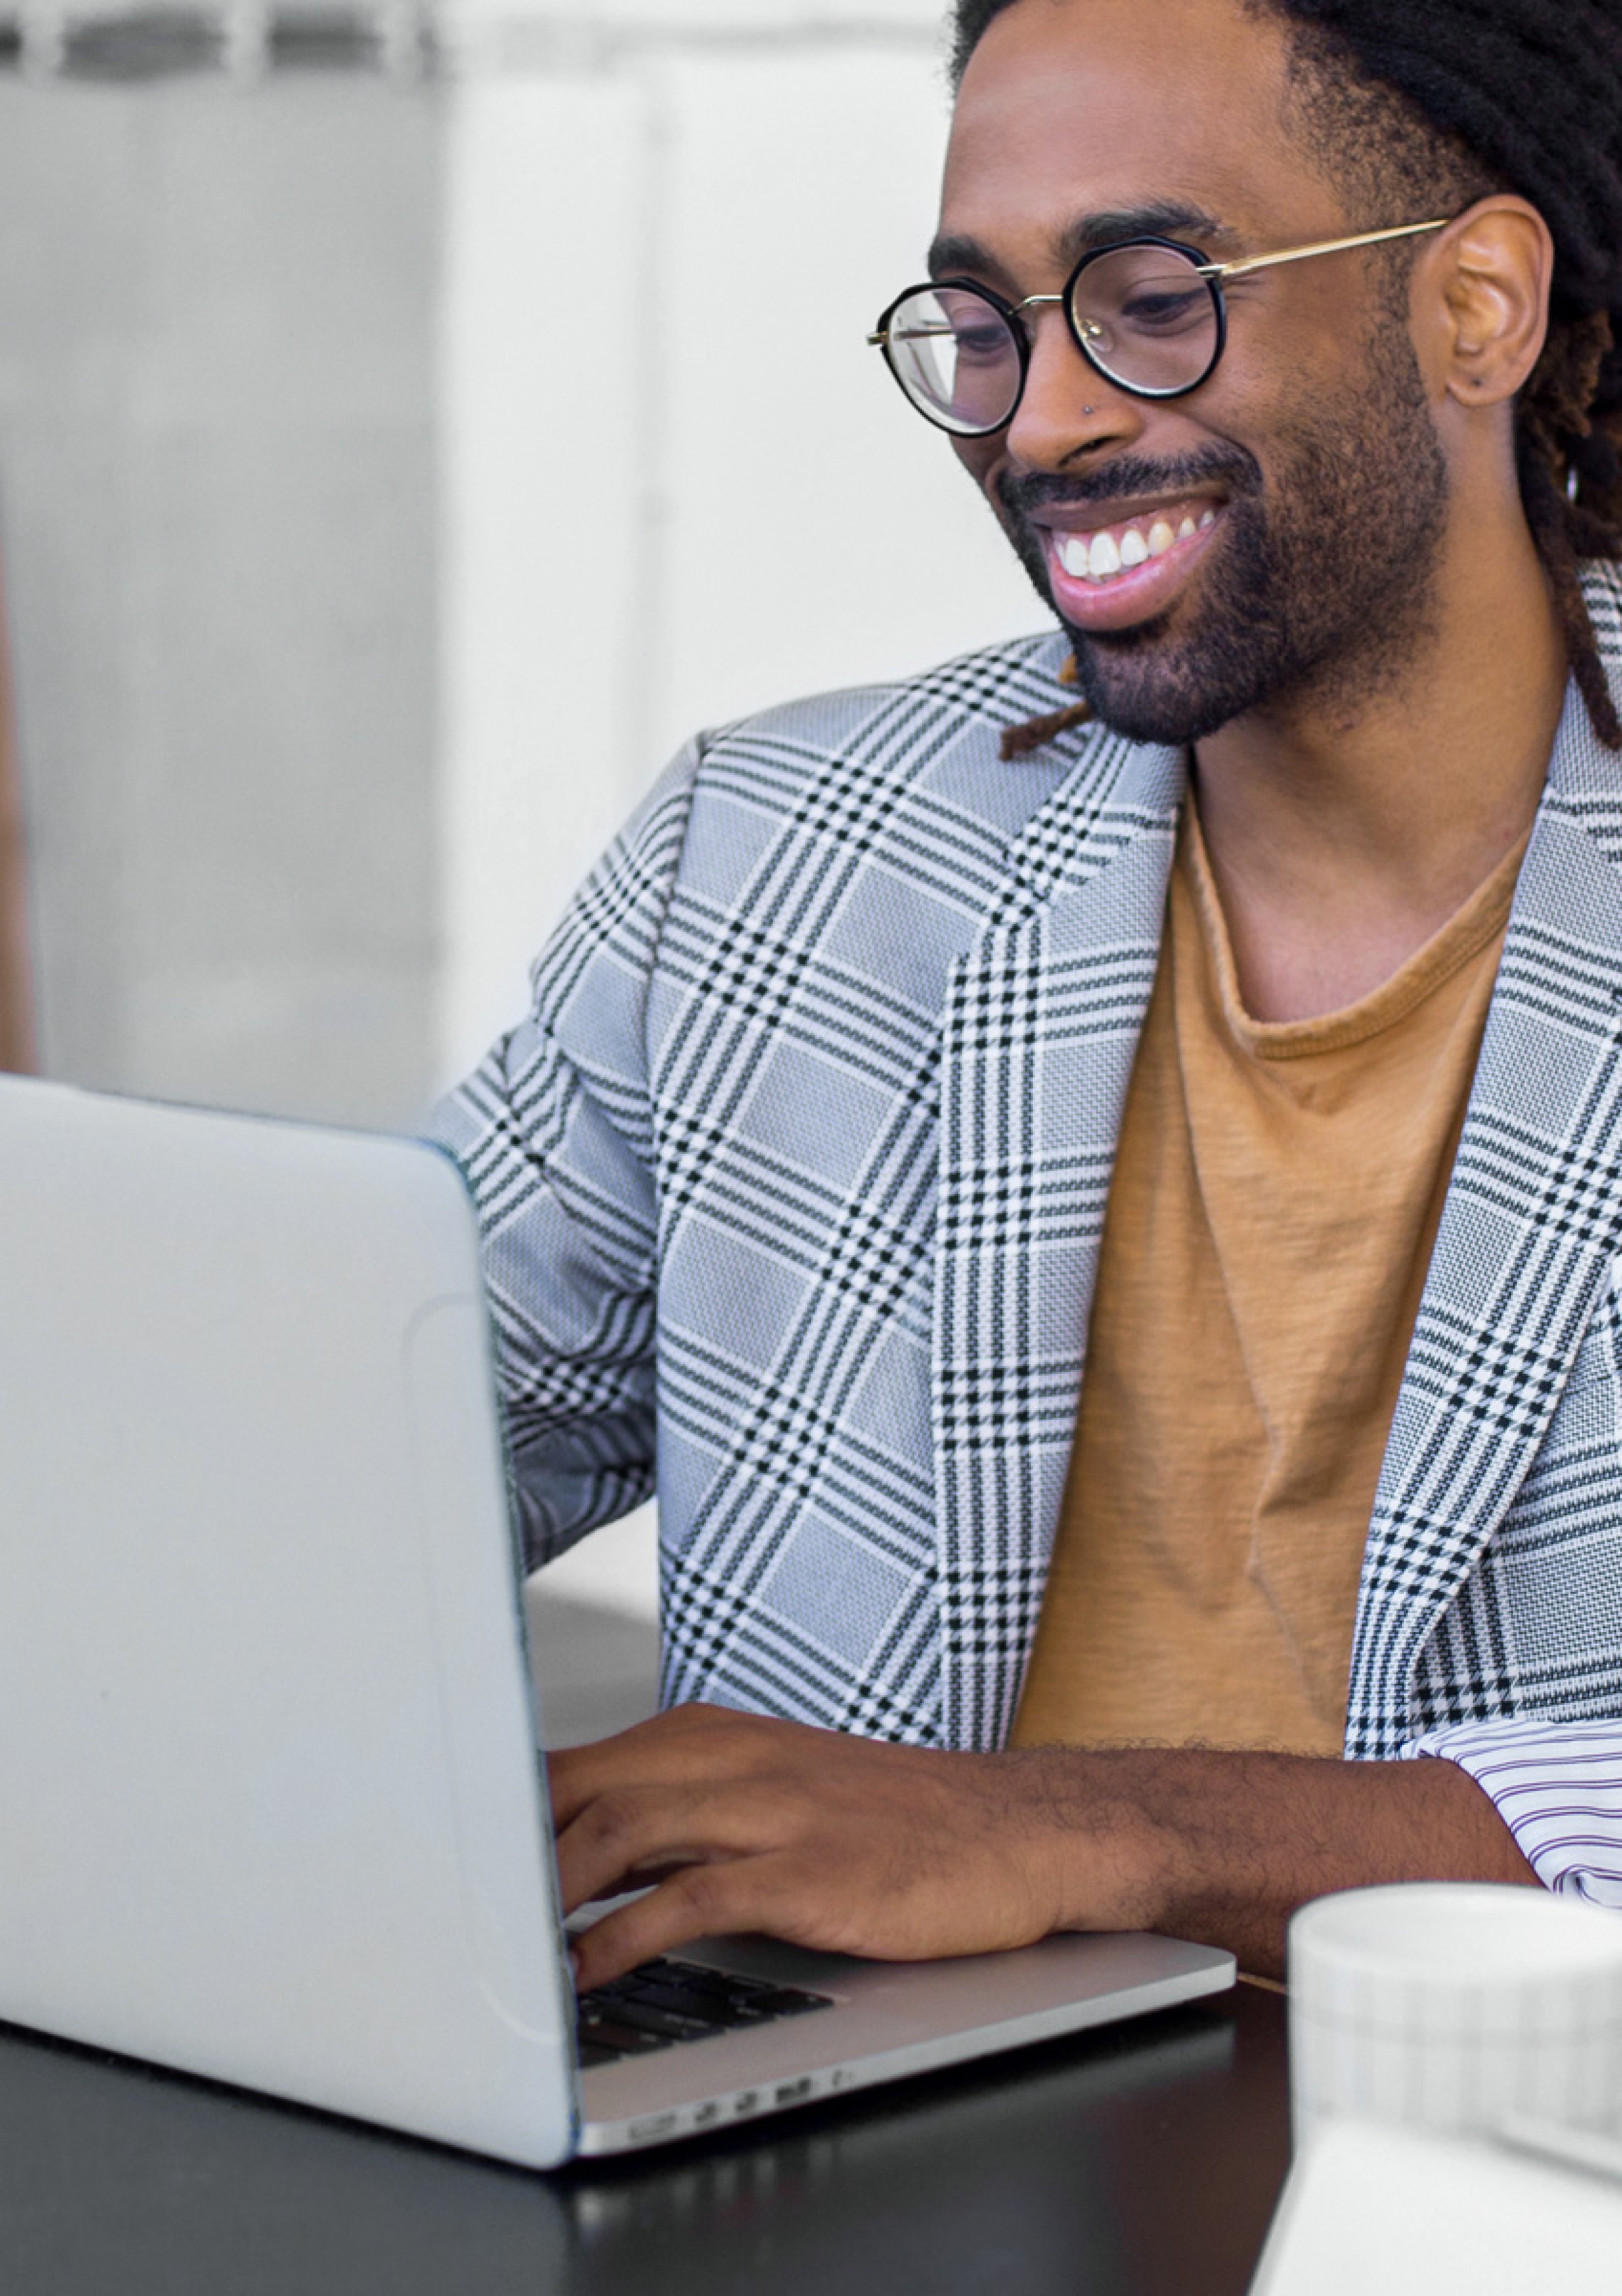 Photo of a smiling young black man wearing glasses and a blazer, looking at his laptop.